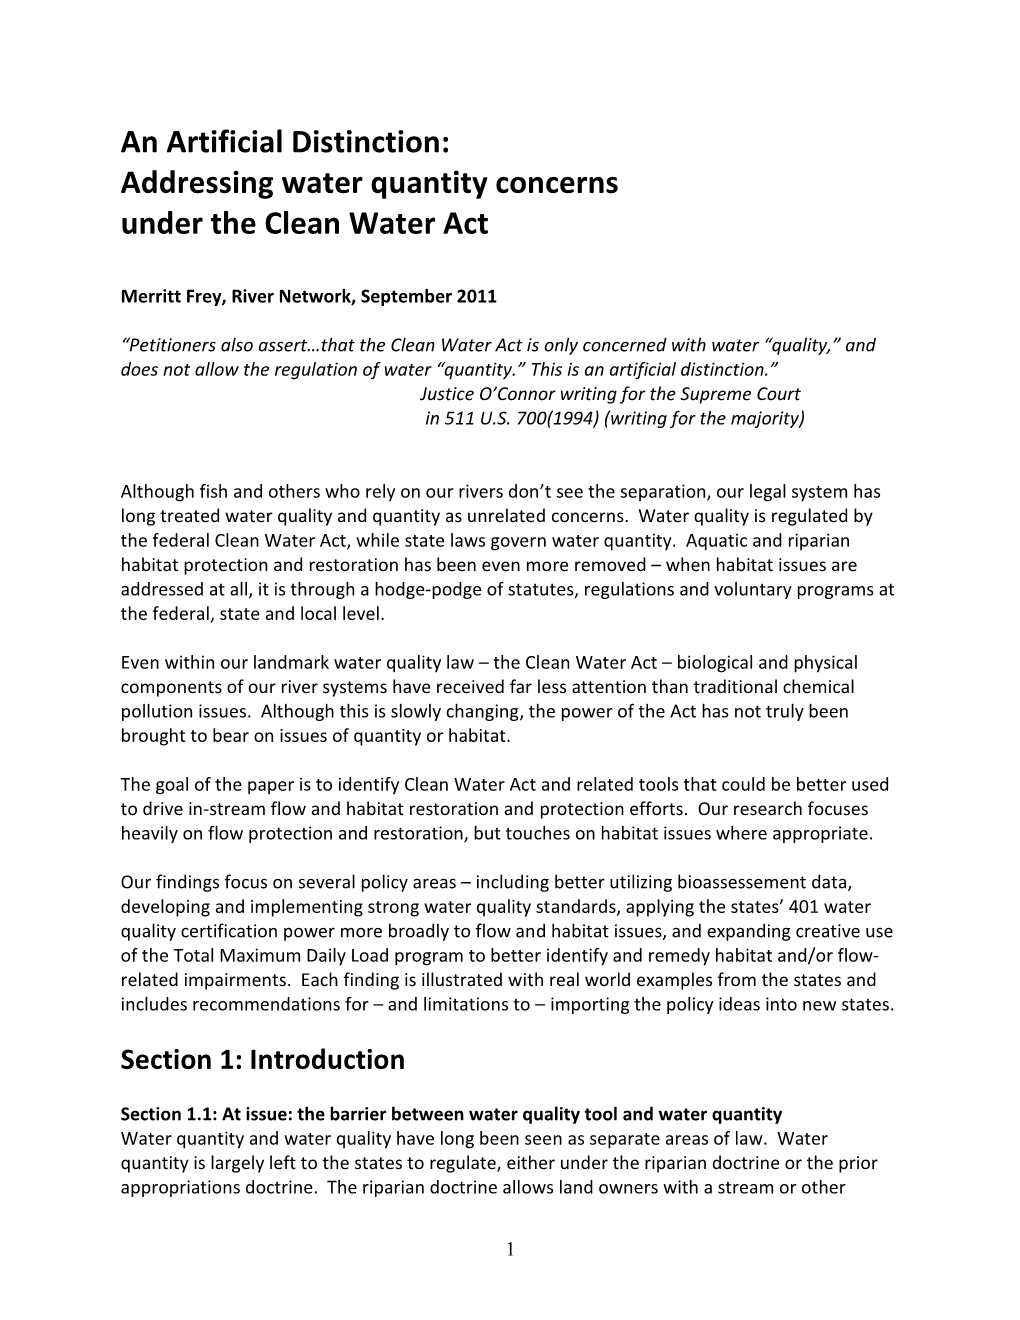 An Artificial Distinction: Addressing Water Quantity Concerns Under the Clean Water Act